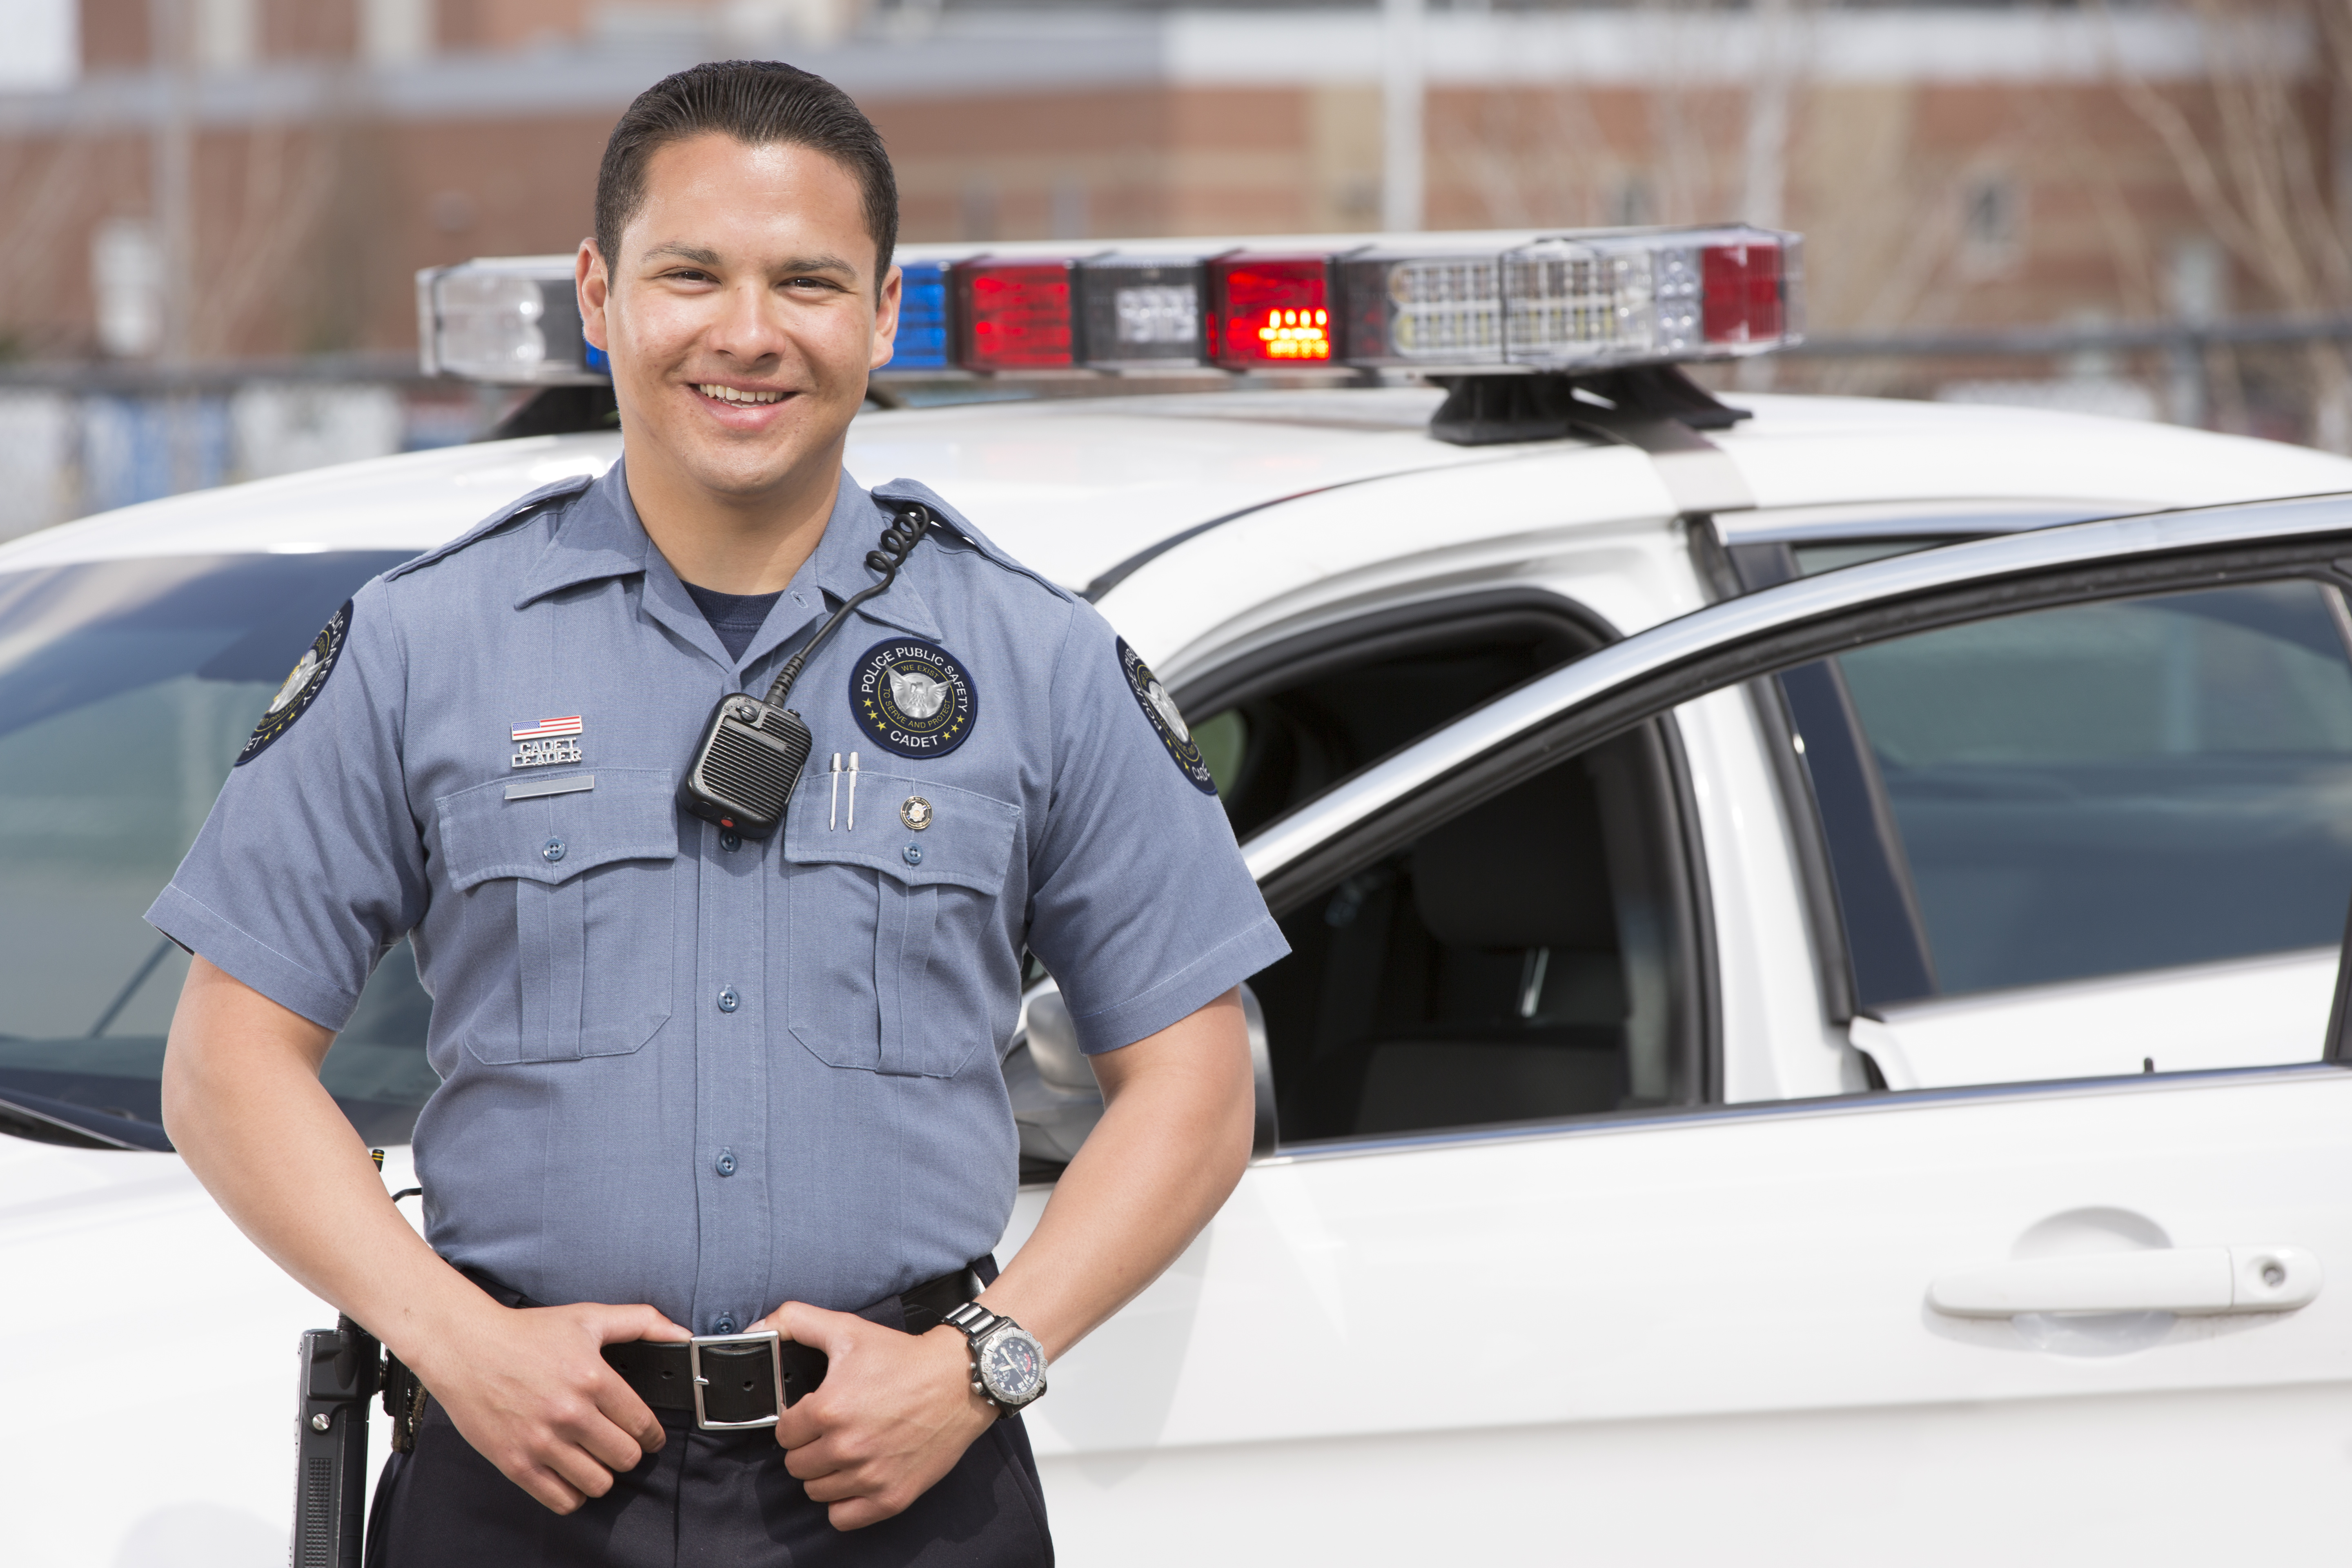 Things to Consider Before Leaving a Career in Law Enforcement